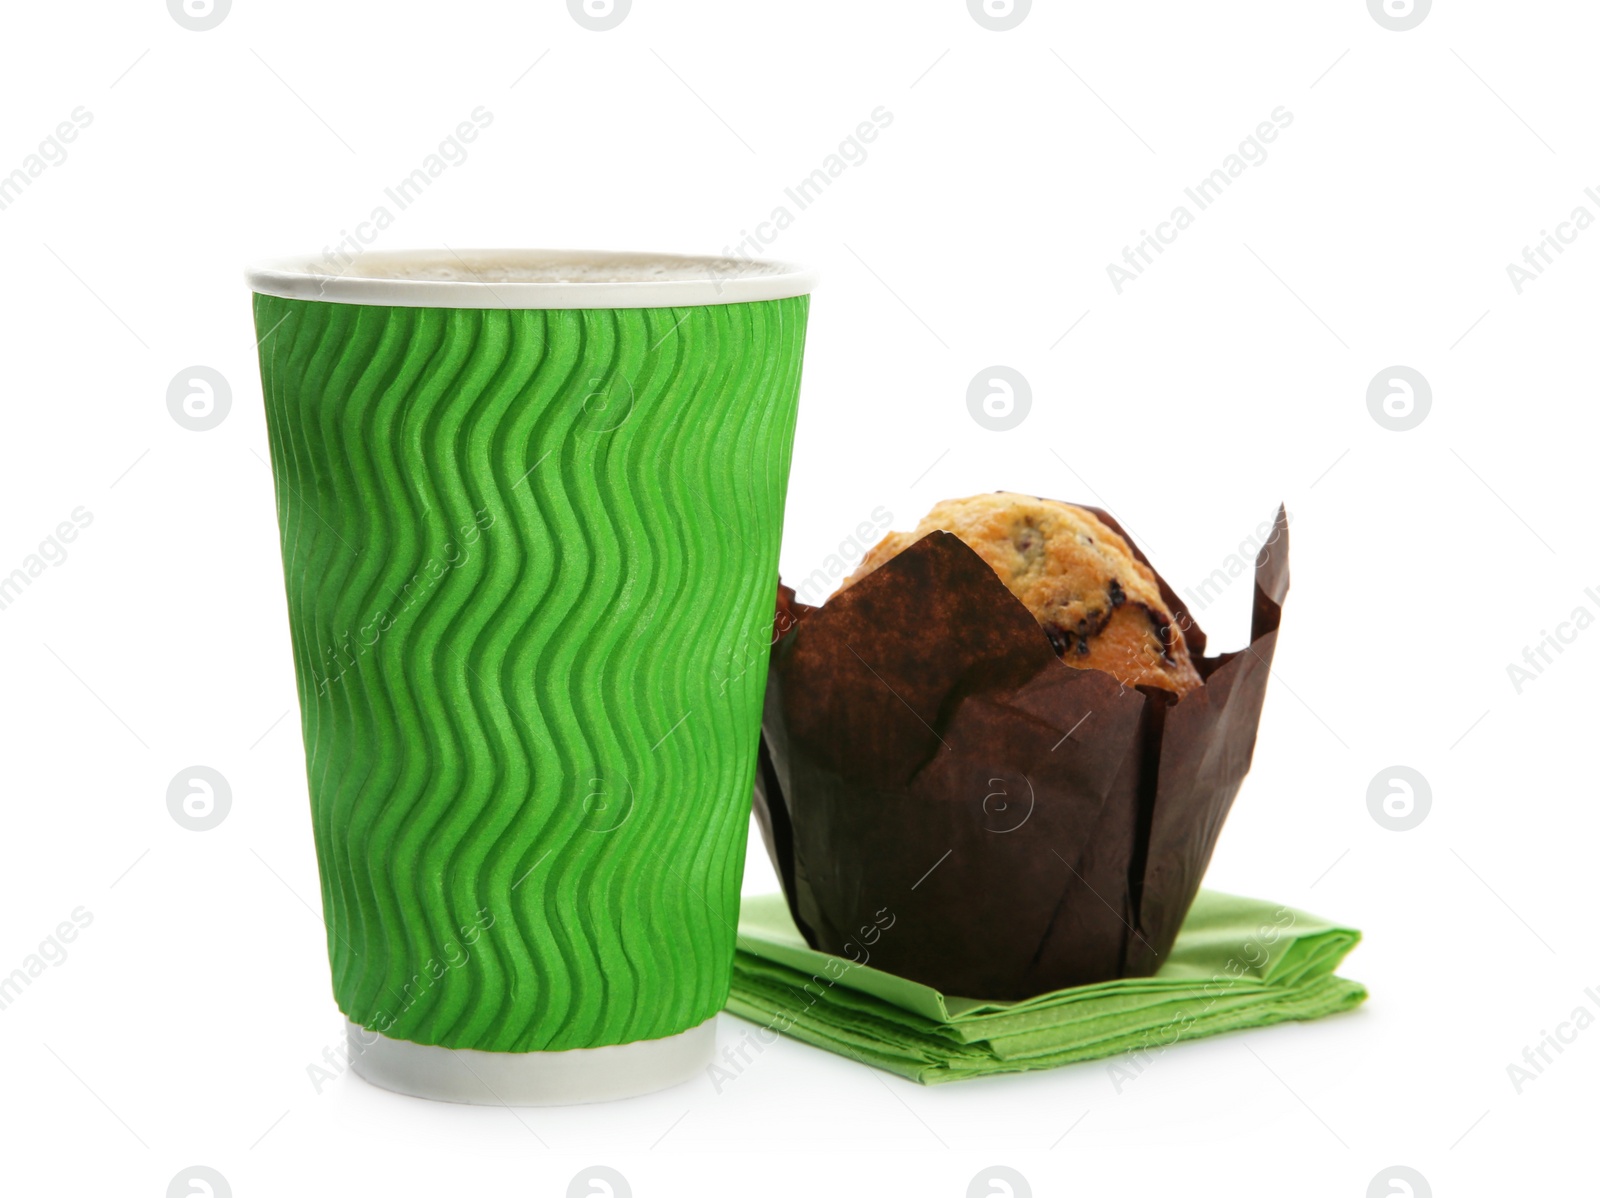 Photo of Cardboard cup of coffee and tasty muffin on white background